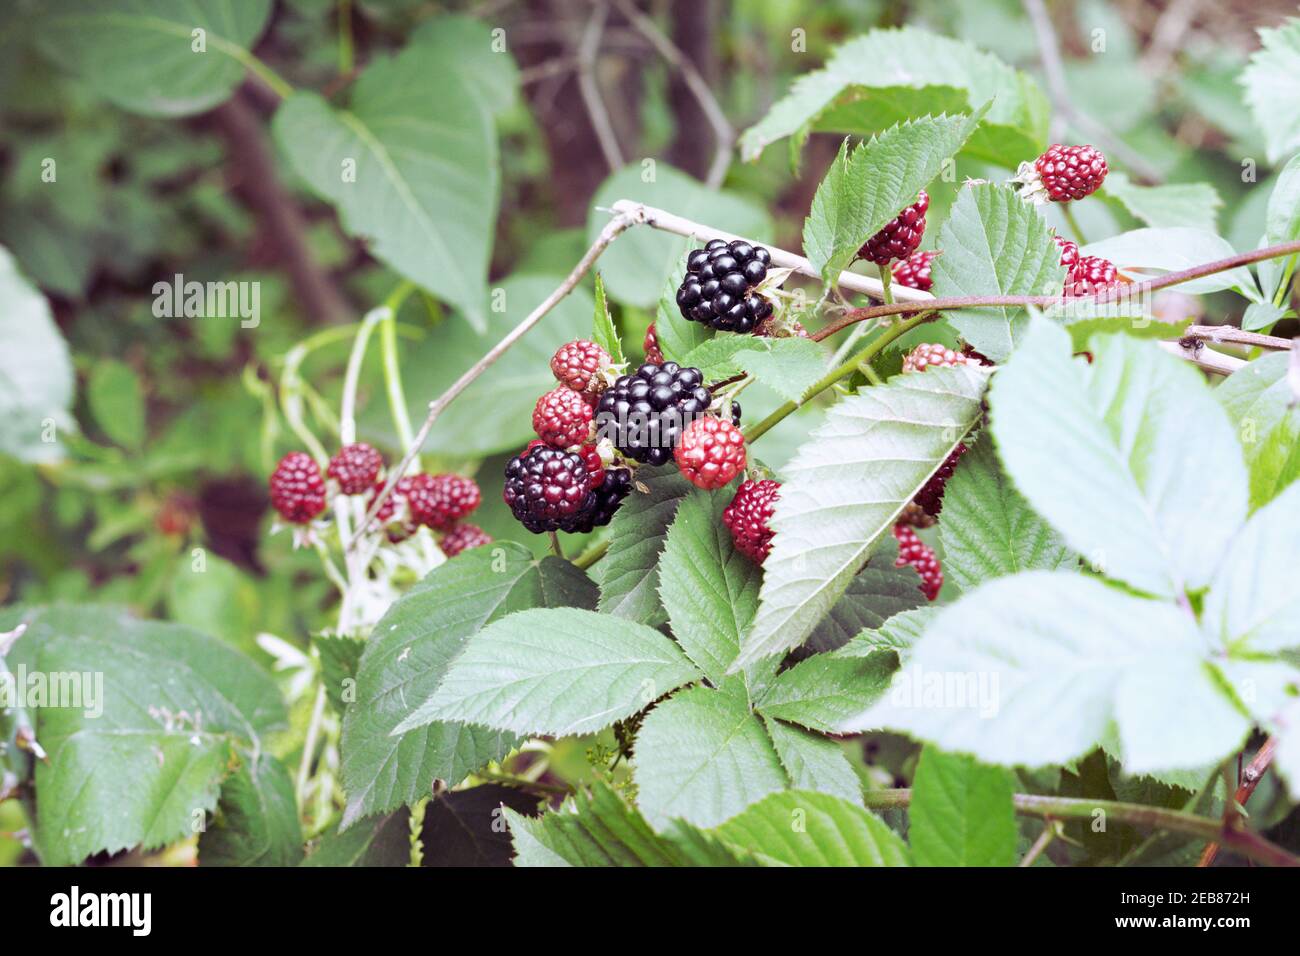 black raspberries bush. fragment of dense thickets with branchlets of ripe and ripeneing berries Stock Photo